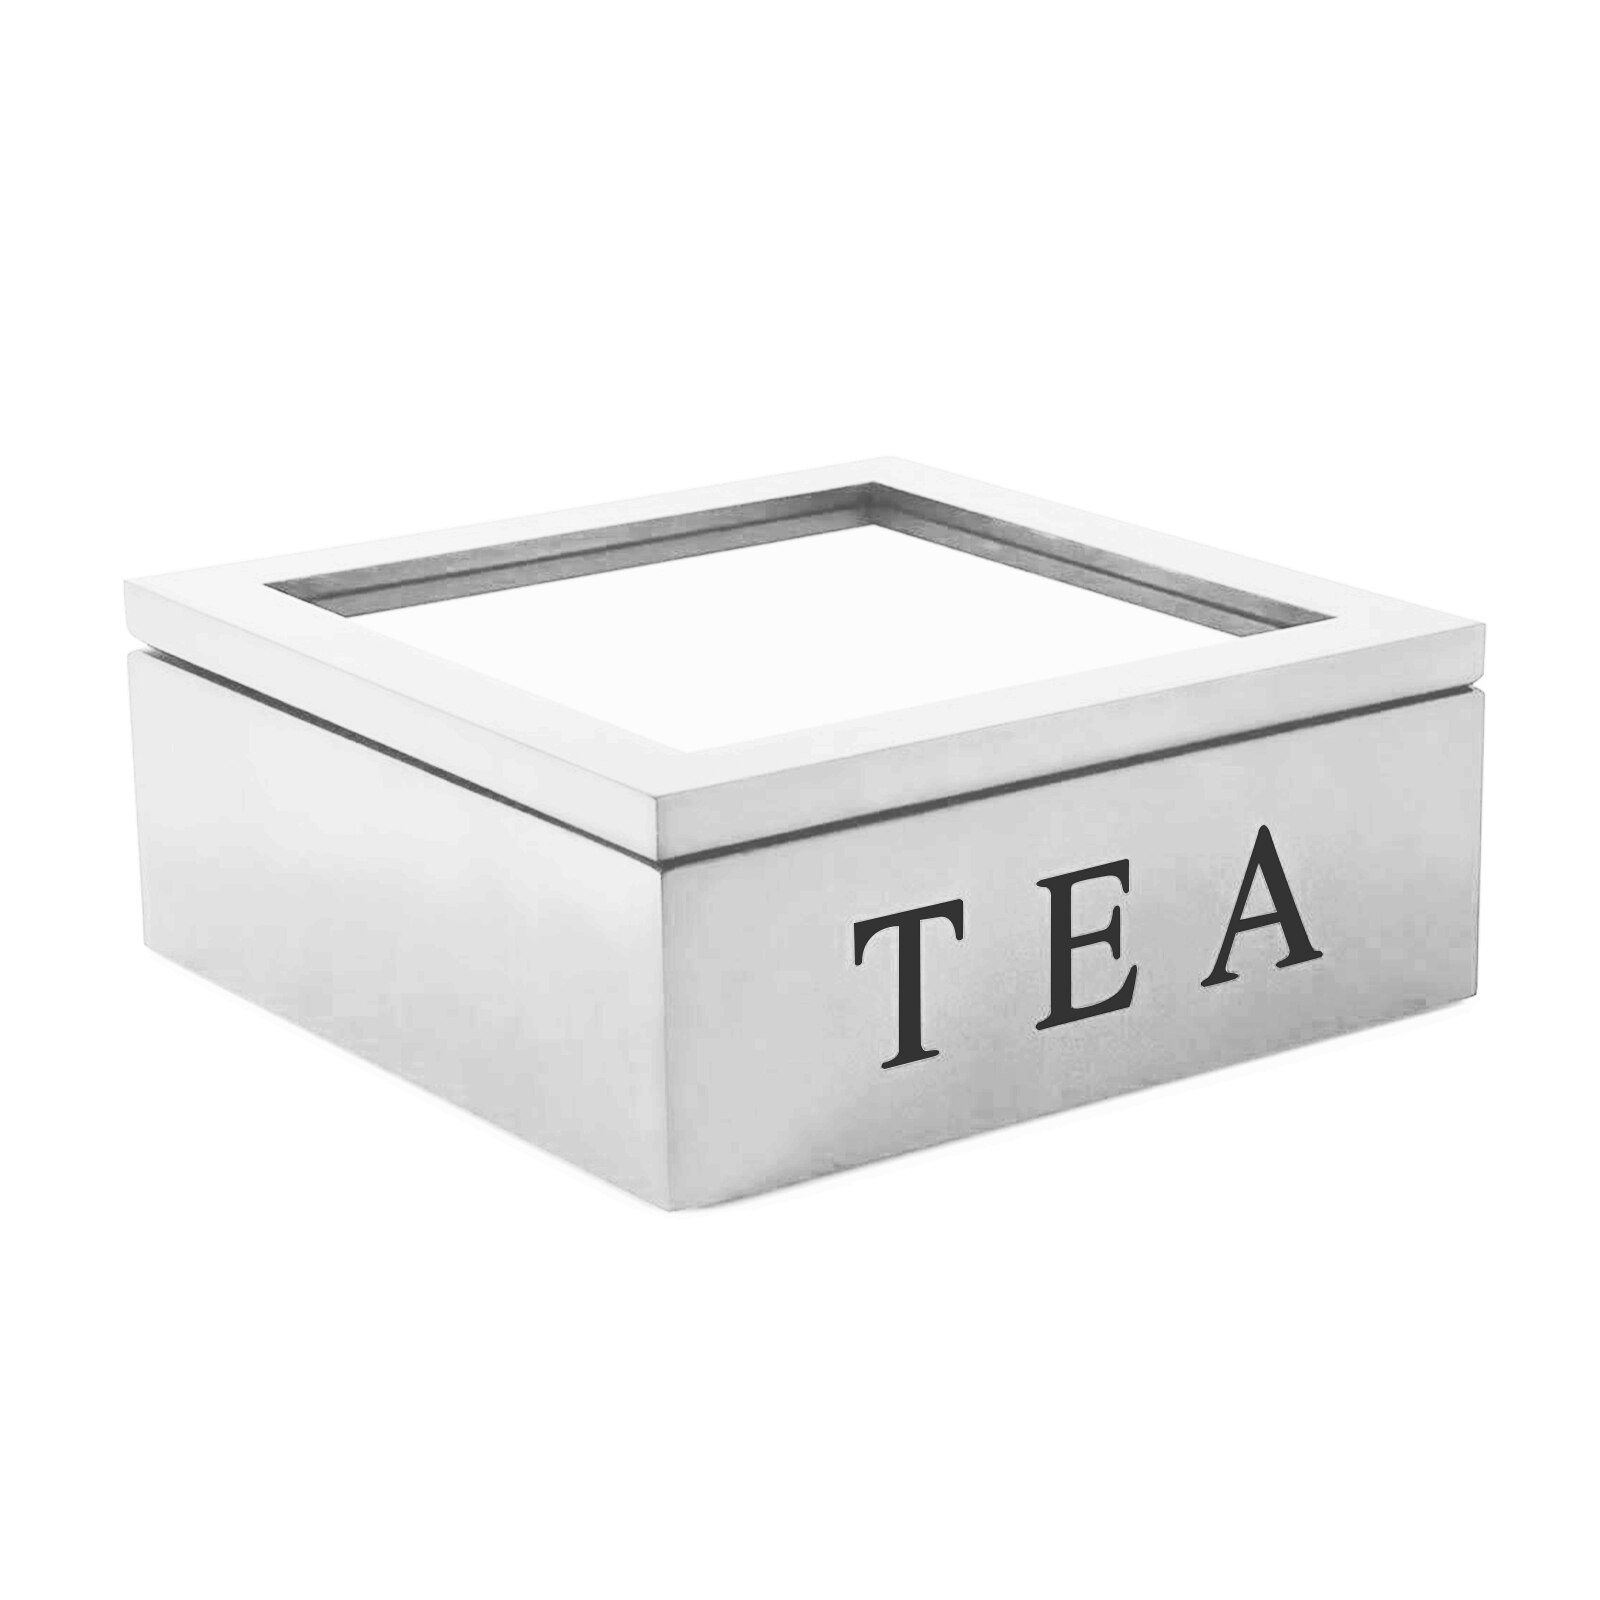 Wooden Tea Box With Lid 9-Compartment Retro Style Coffee Tea Bag Storage Holder Organizer For Kitchen Cabinets home Kitchen: A